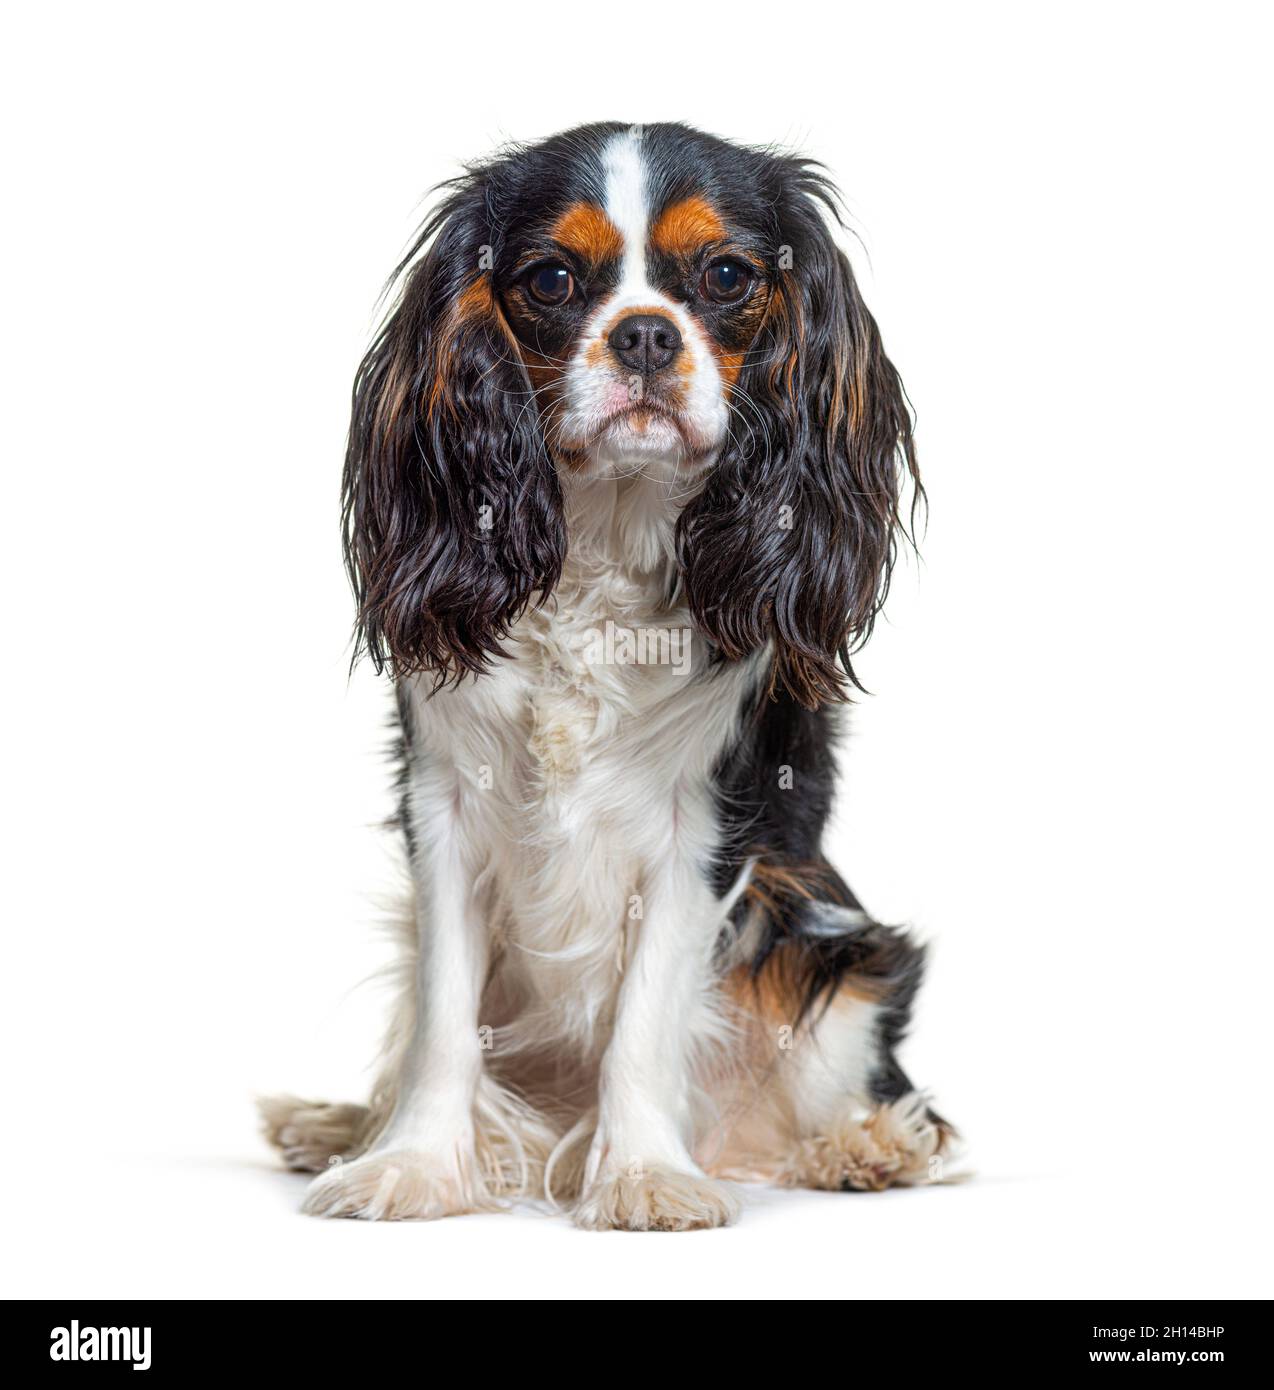 Tri-color Cavalier King Charles dog, sitting and facing at camera, isolated Stock Photo